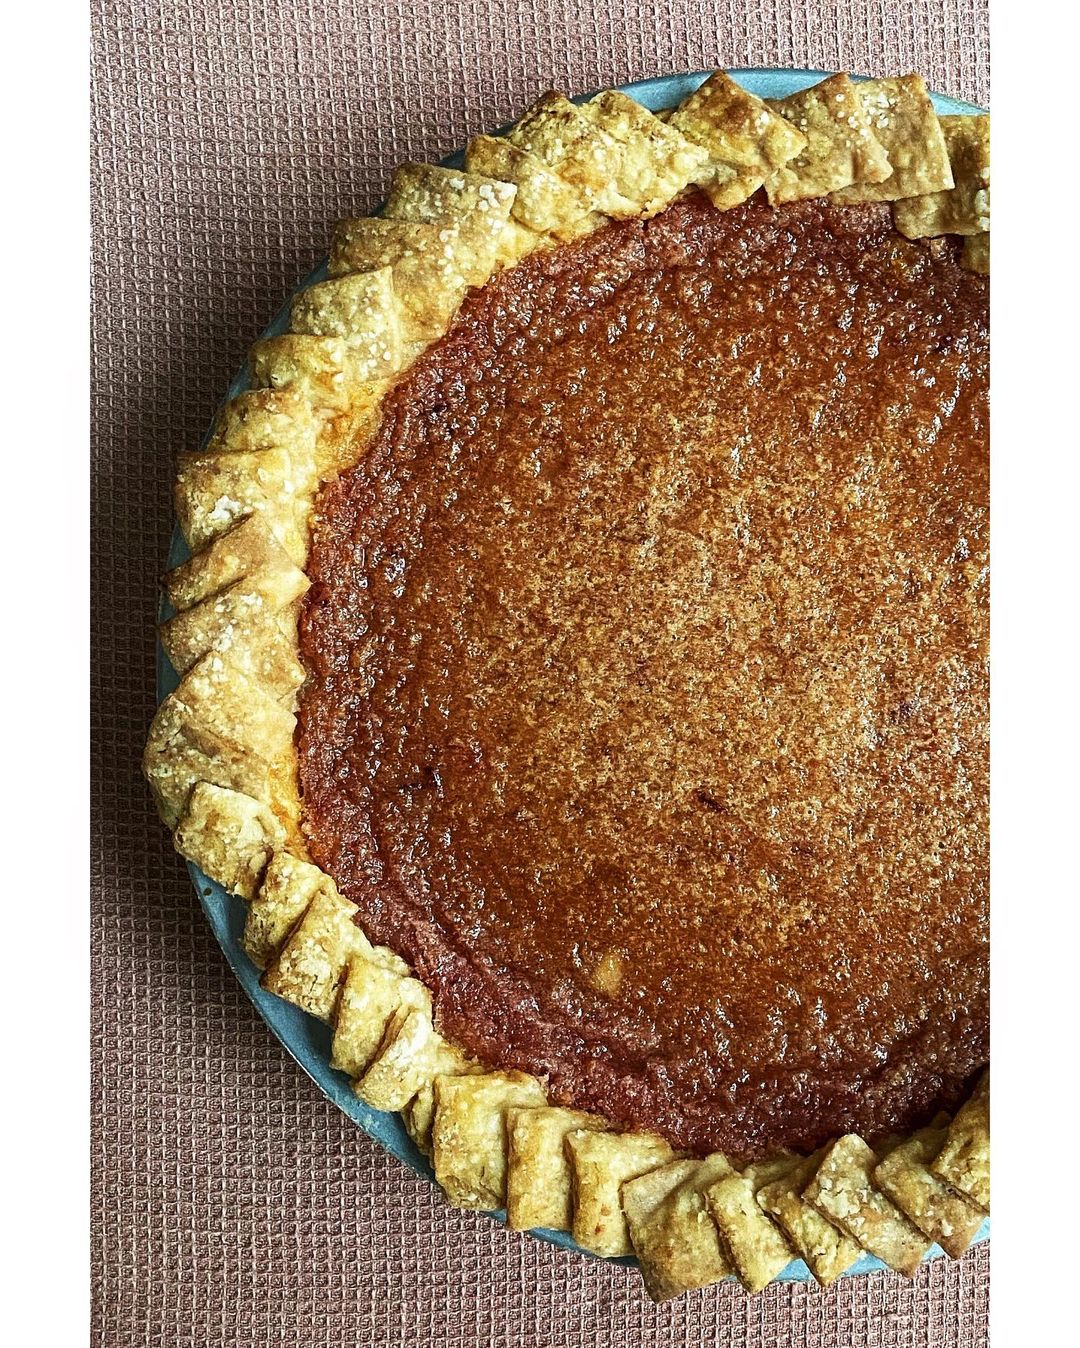 15 gorgeous pies we can't wait to try this thanksgiving